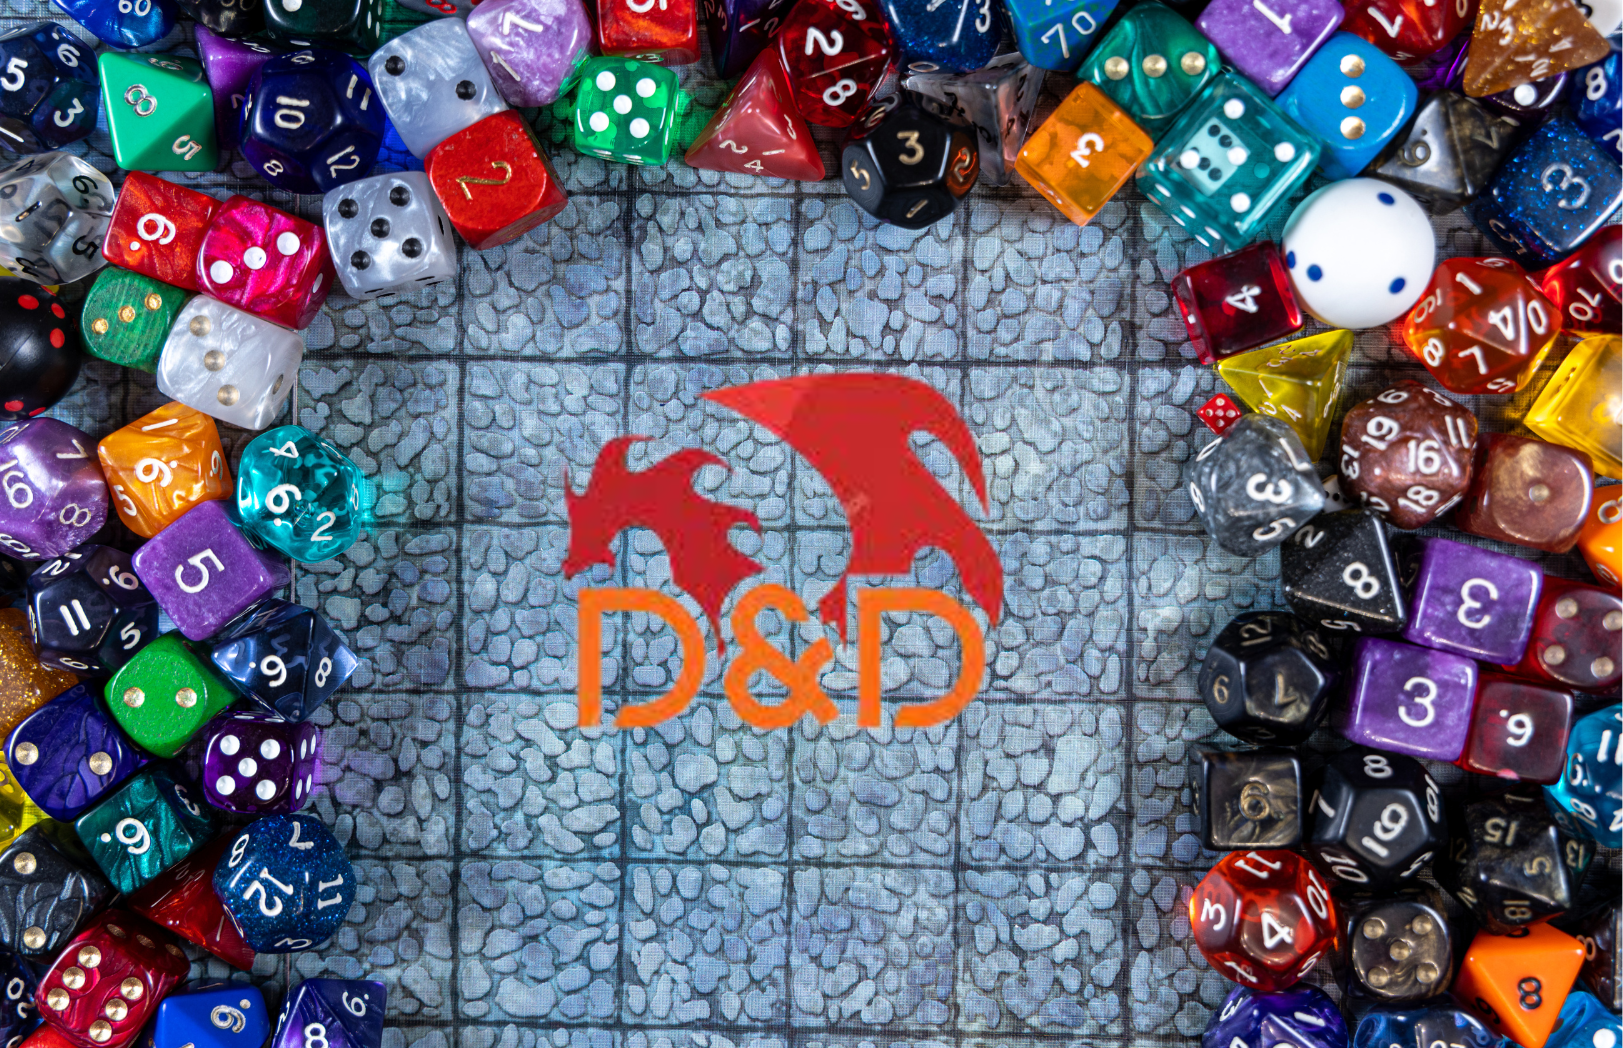 "D&D" with red dragon silhouette surrounded by dice.